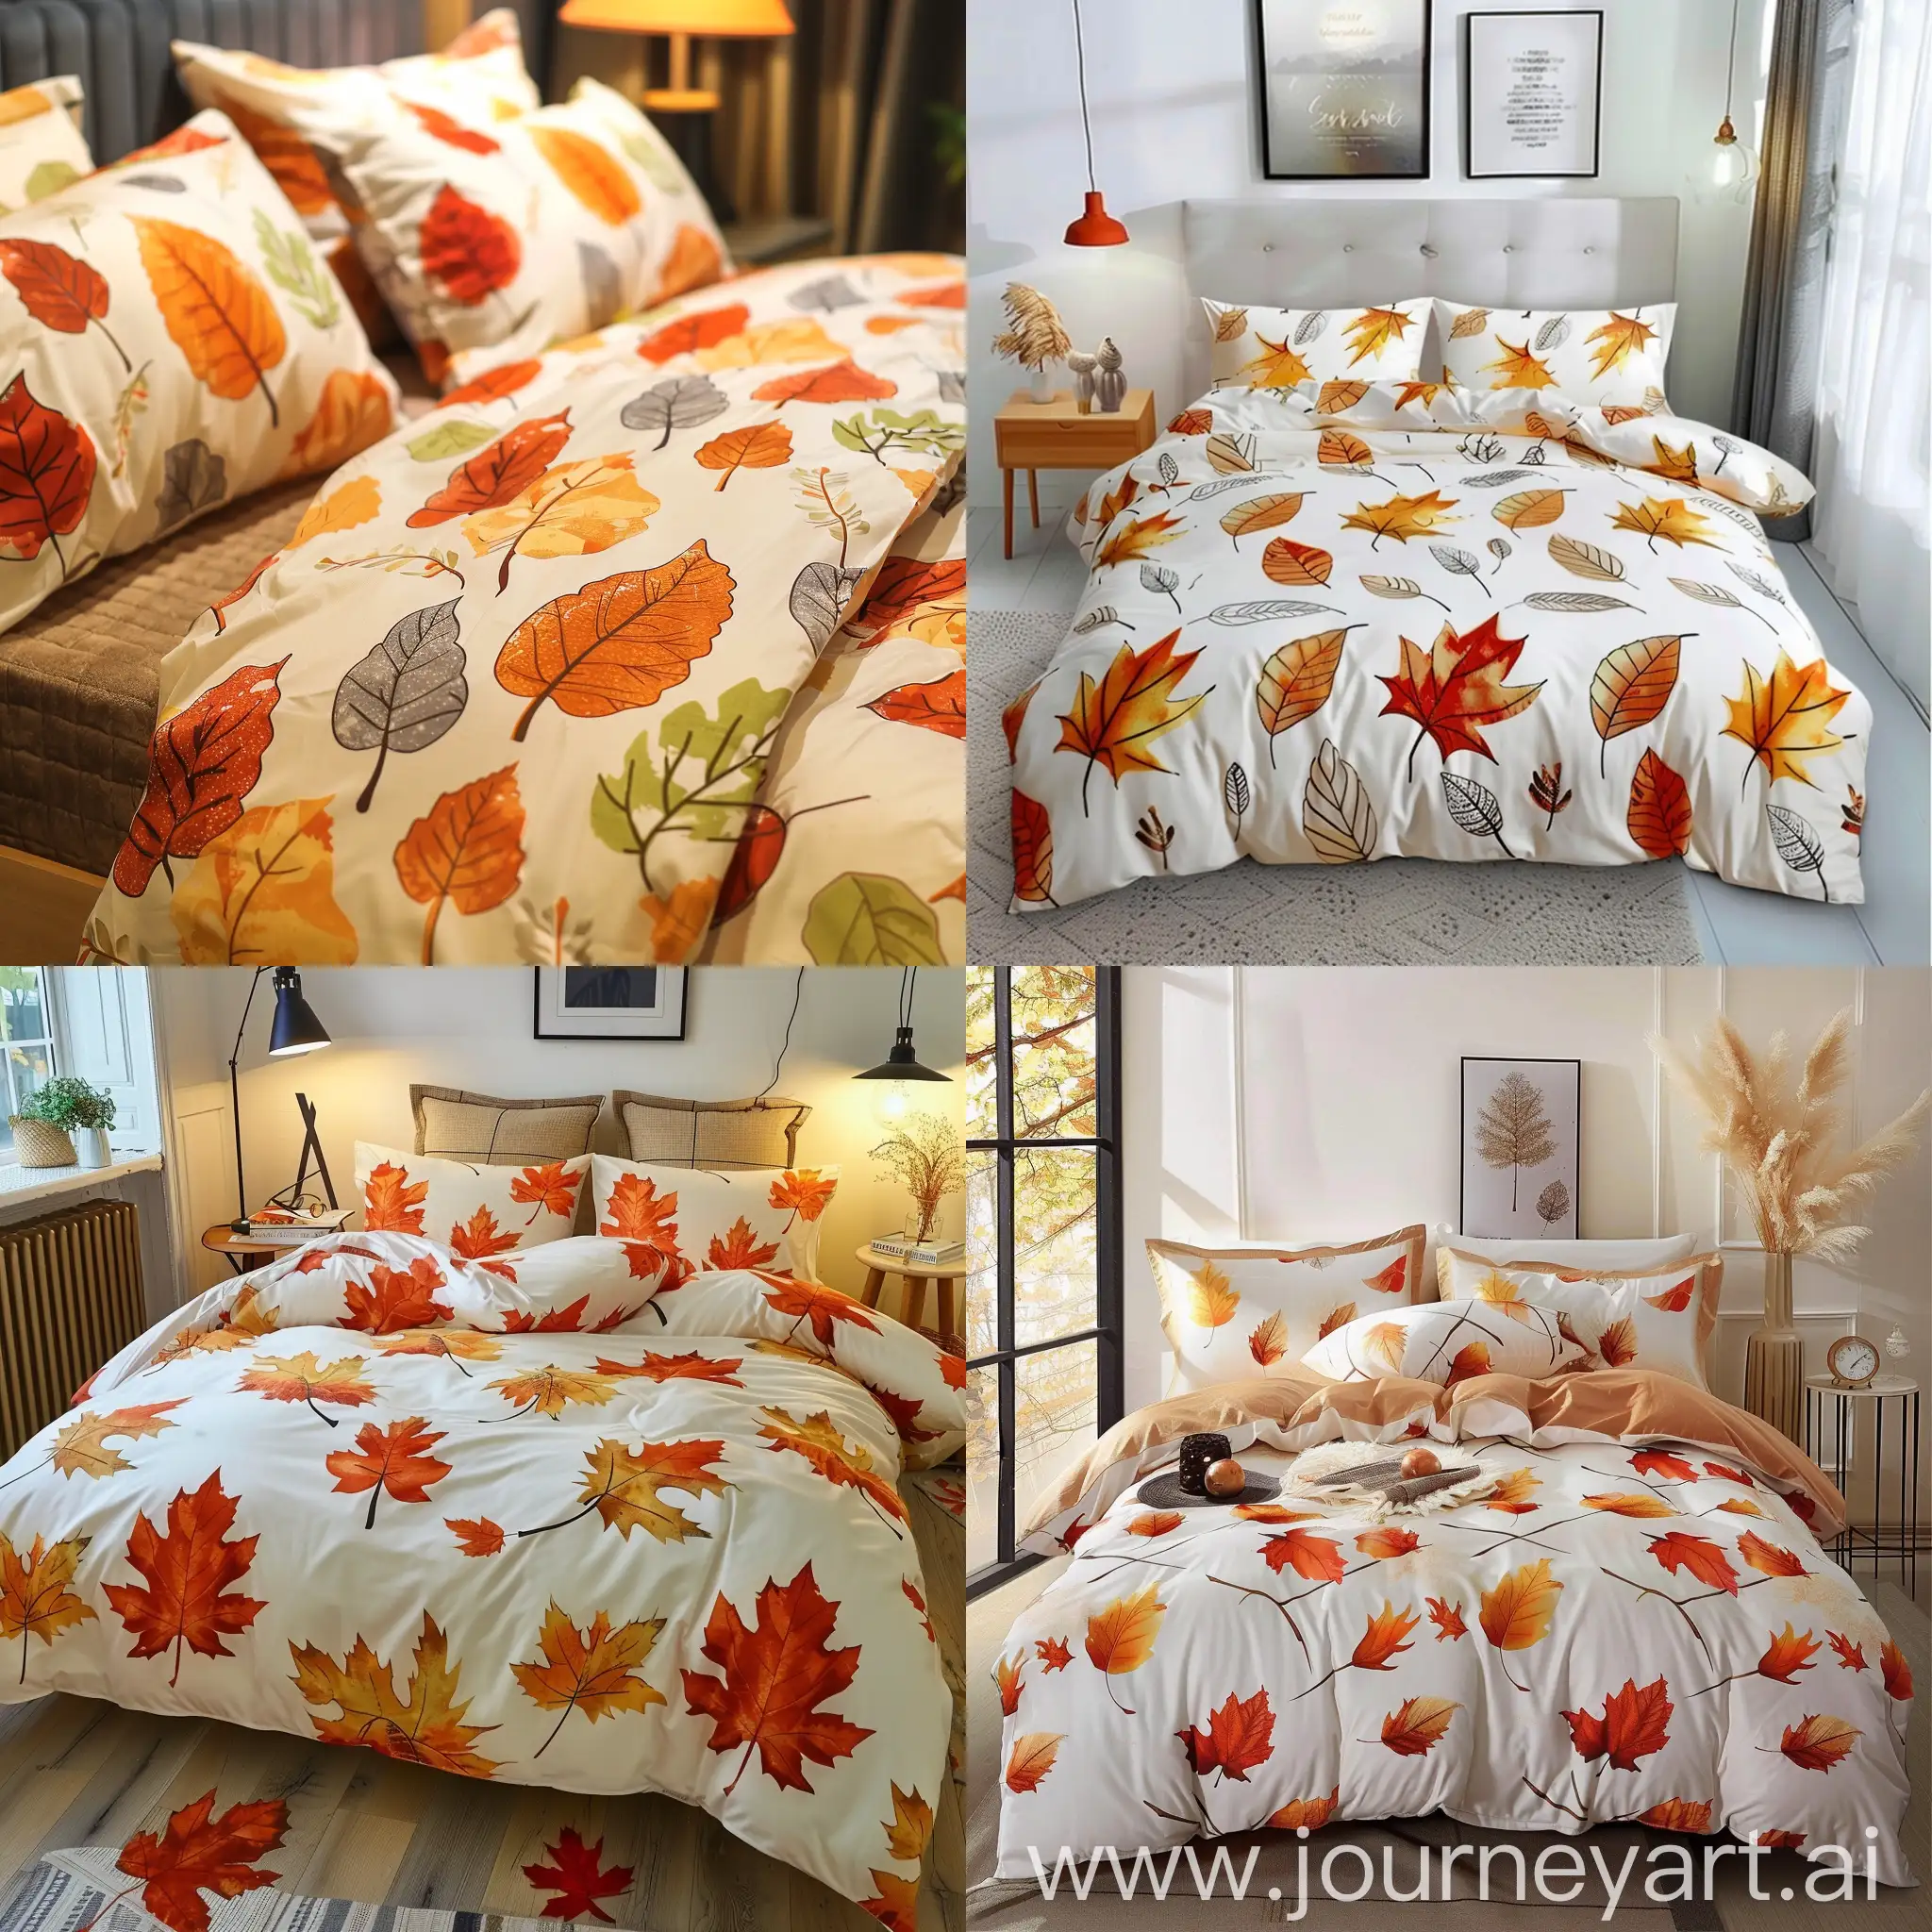 AutumnInspired-Bed-Set-Design-with-Vibrant-Leaves-Patterns